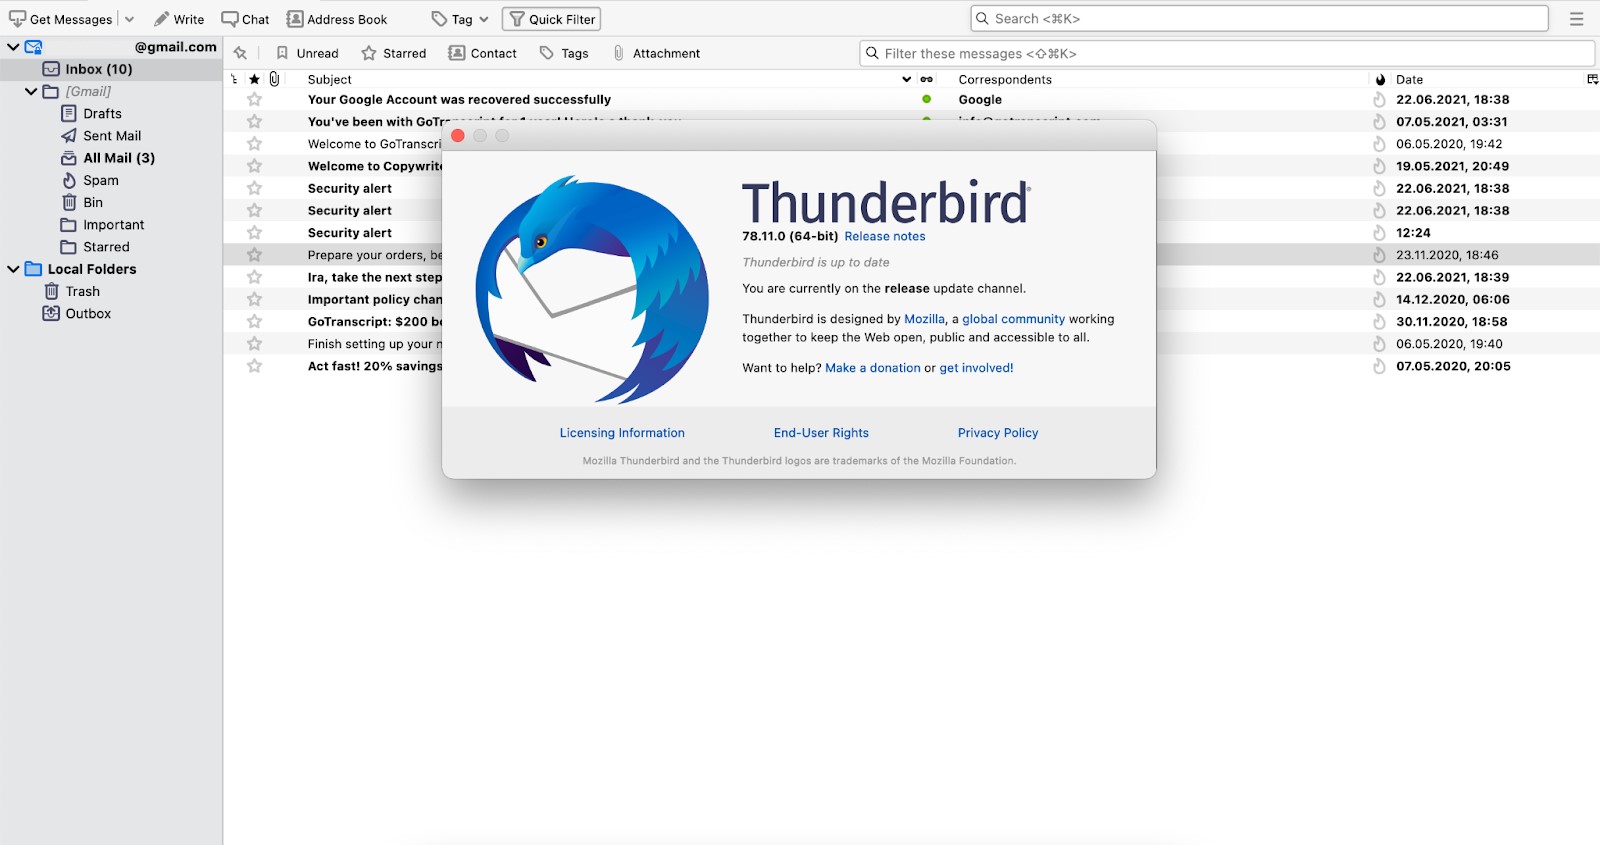 how-to-mark-all-messages-as-read-quickly-in-mozilla-thunderbird